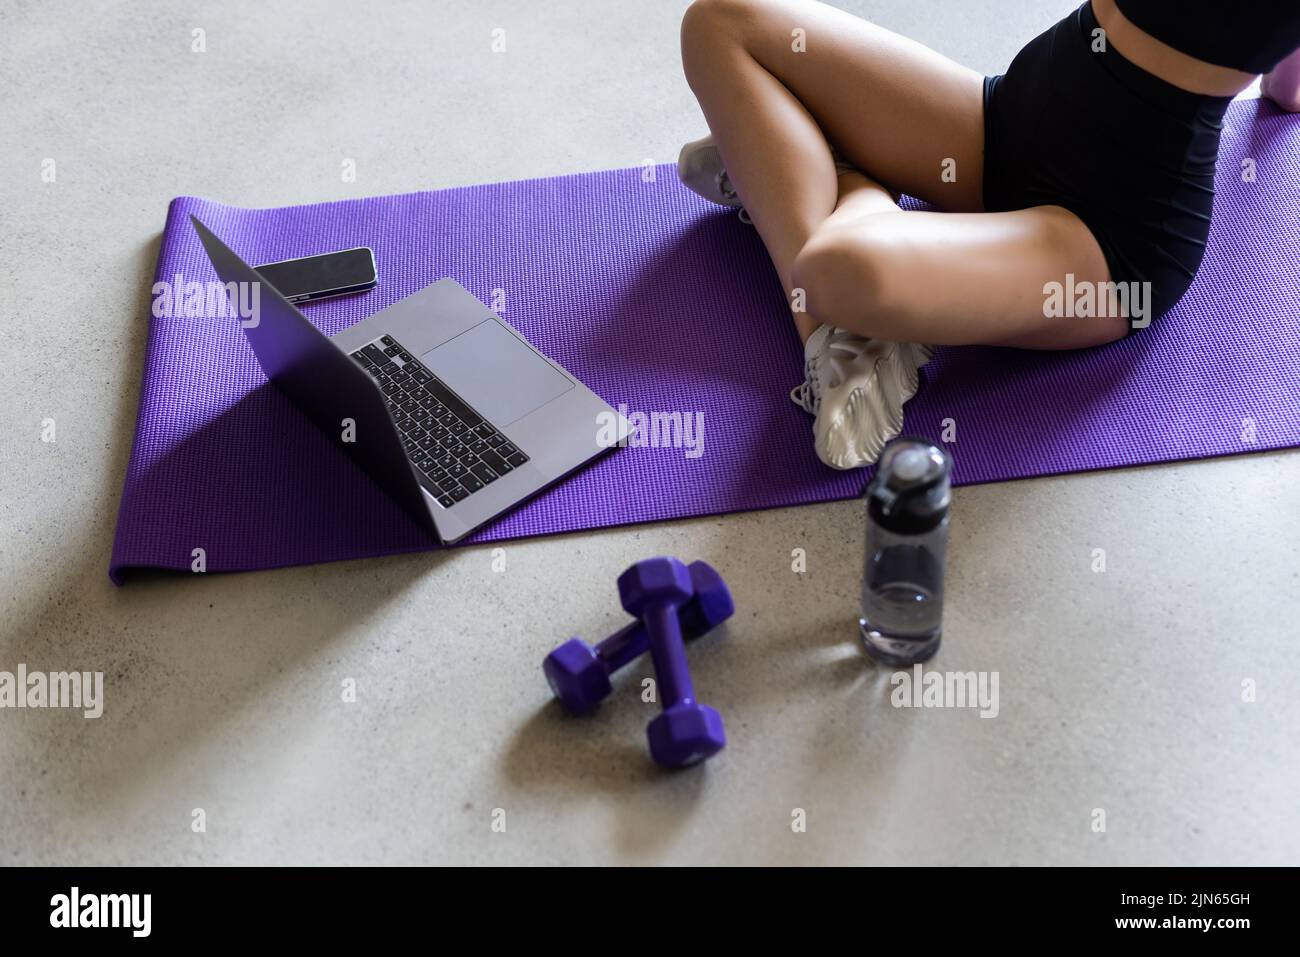 Close up body of woman doing yoga exercises on mat in front of laptop. Stock Photo